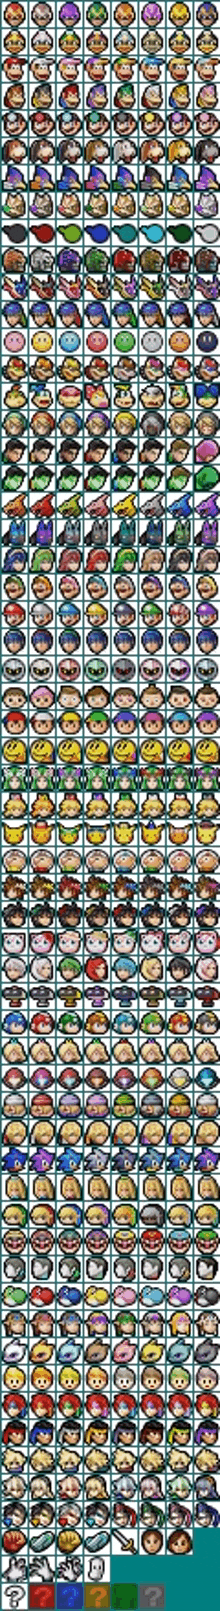 super smash bros for nintendo 3ds icons characters nintendo 3ds smash bros